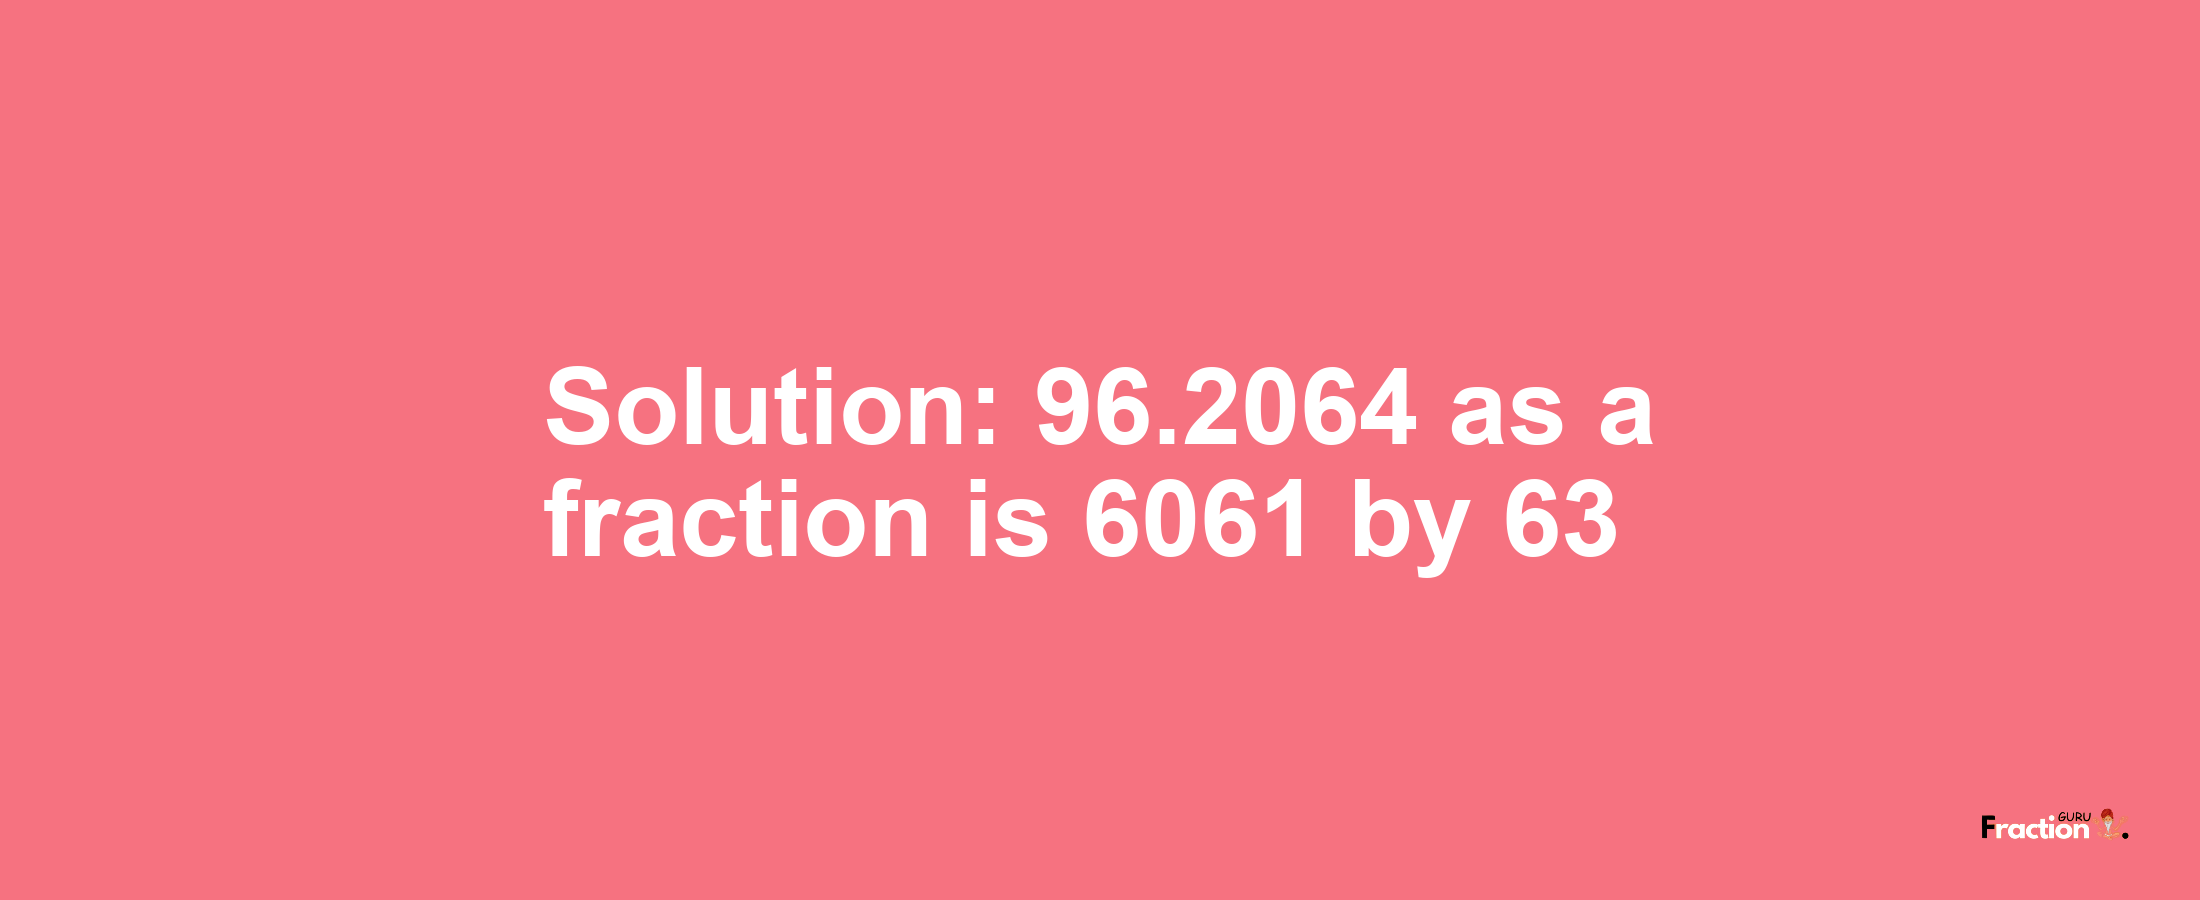 Solution:96.2064 as a fraction is 6061/63